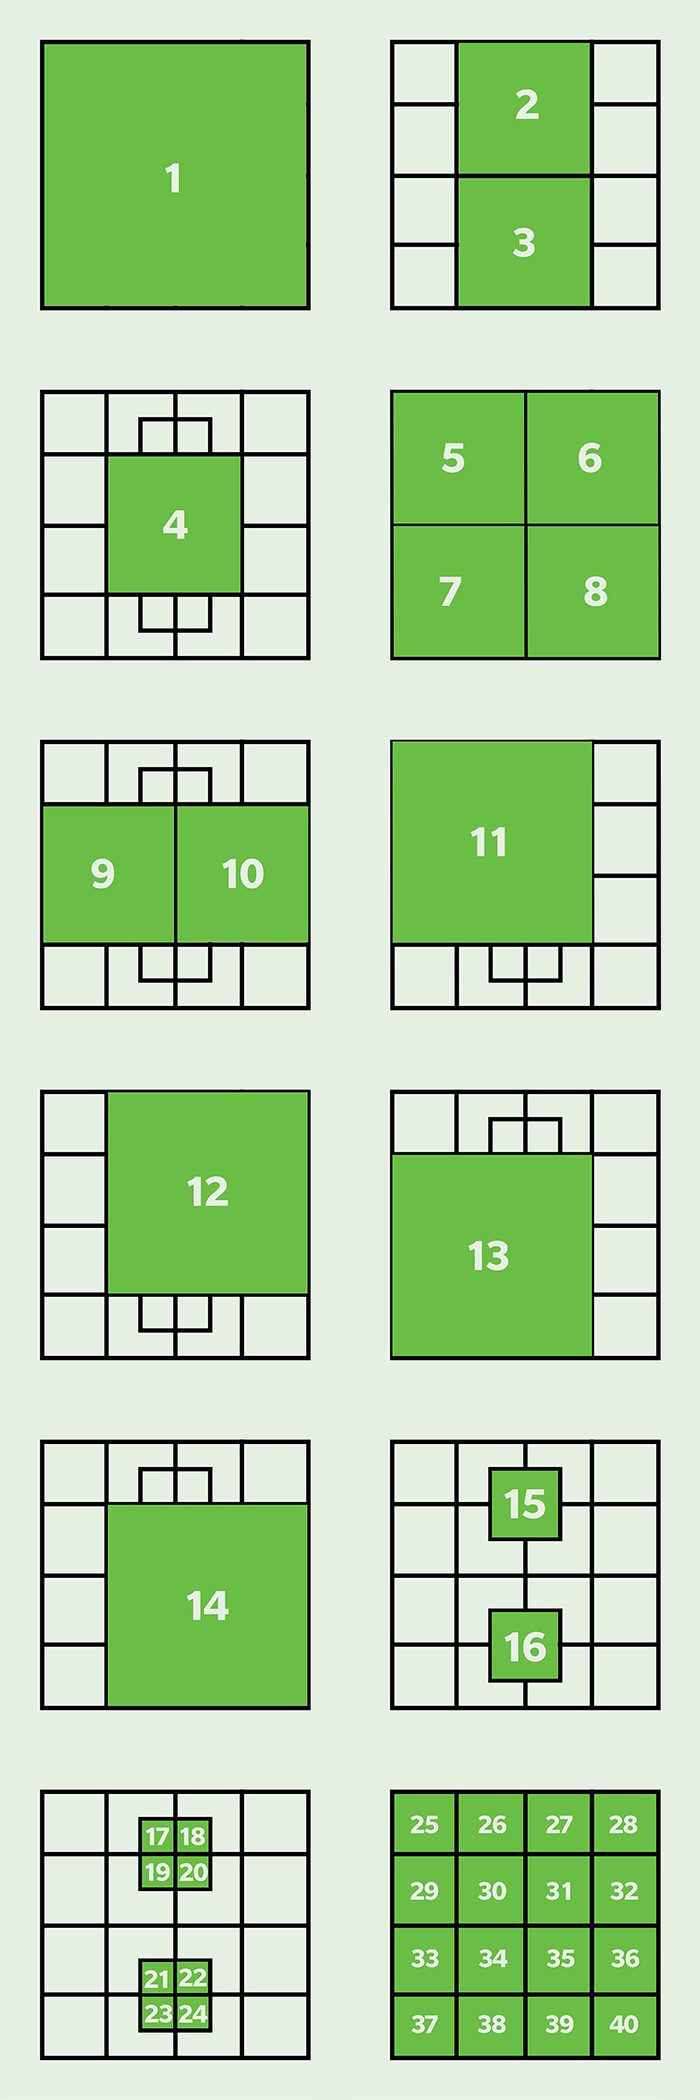 Solutions to count the squares puzzle reveal 40 squares within the original grid